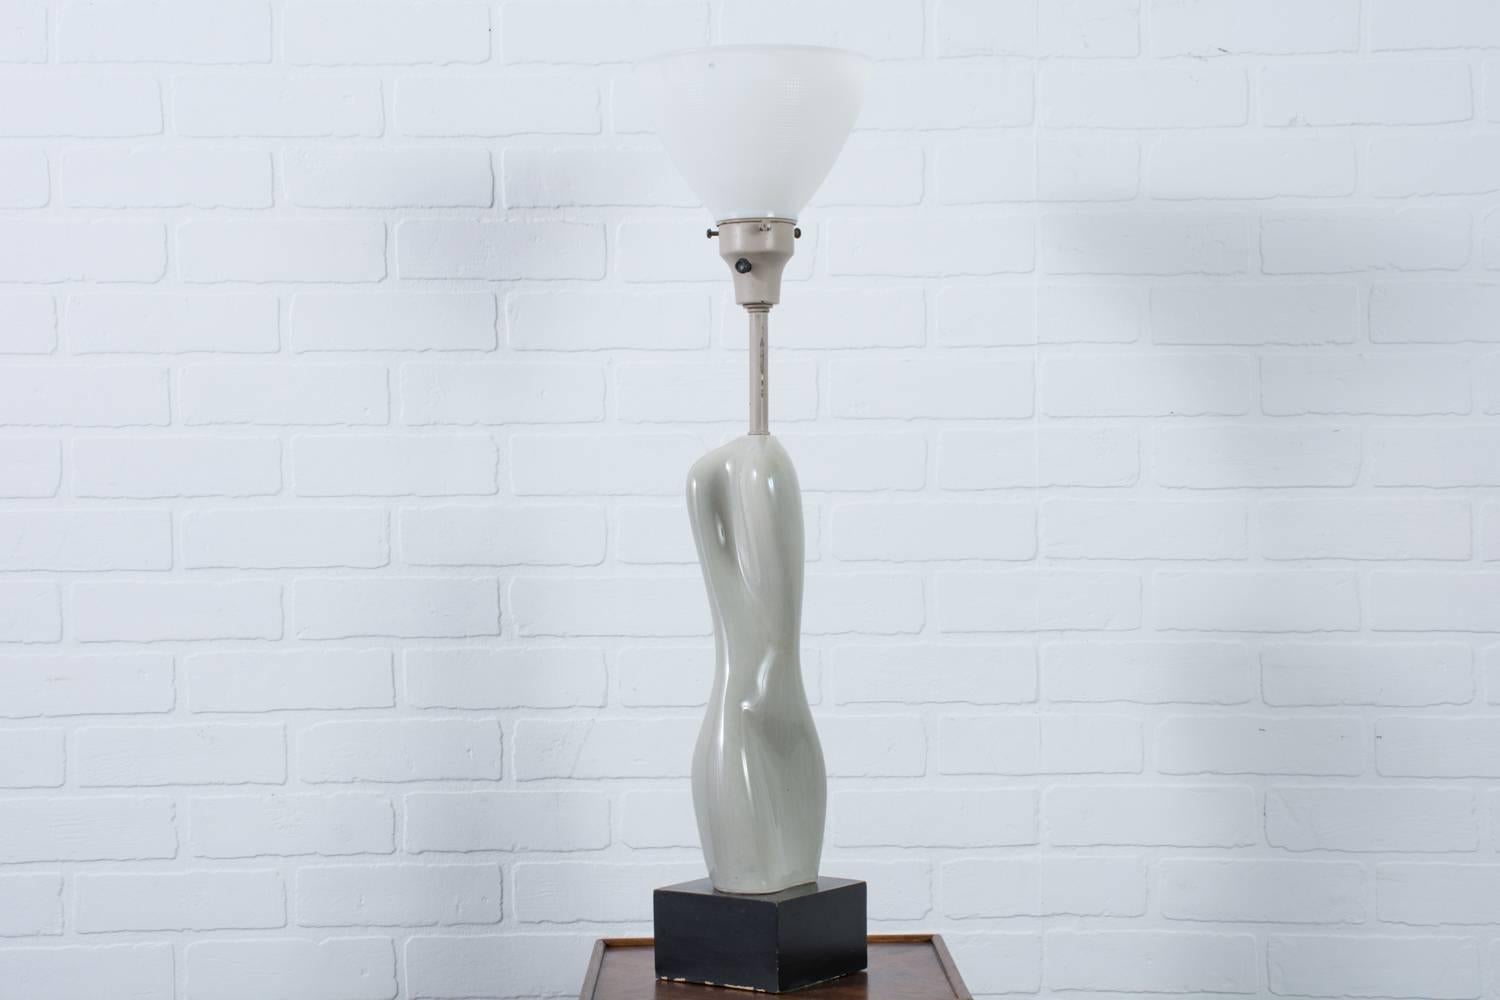 This vintage midcentury ceramic table lamp was designed by Russel Wright in the 1940s. The ceramic body of the lamp is in the form of a nude twisting to one side with a grey glazed finish. It is mounted on a black lacquered wood base and has a metal